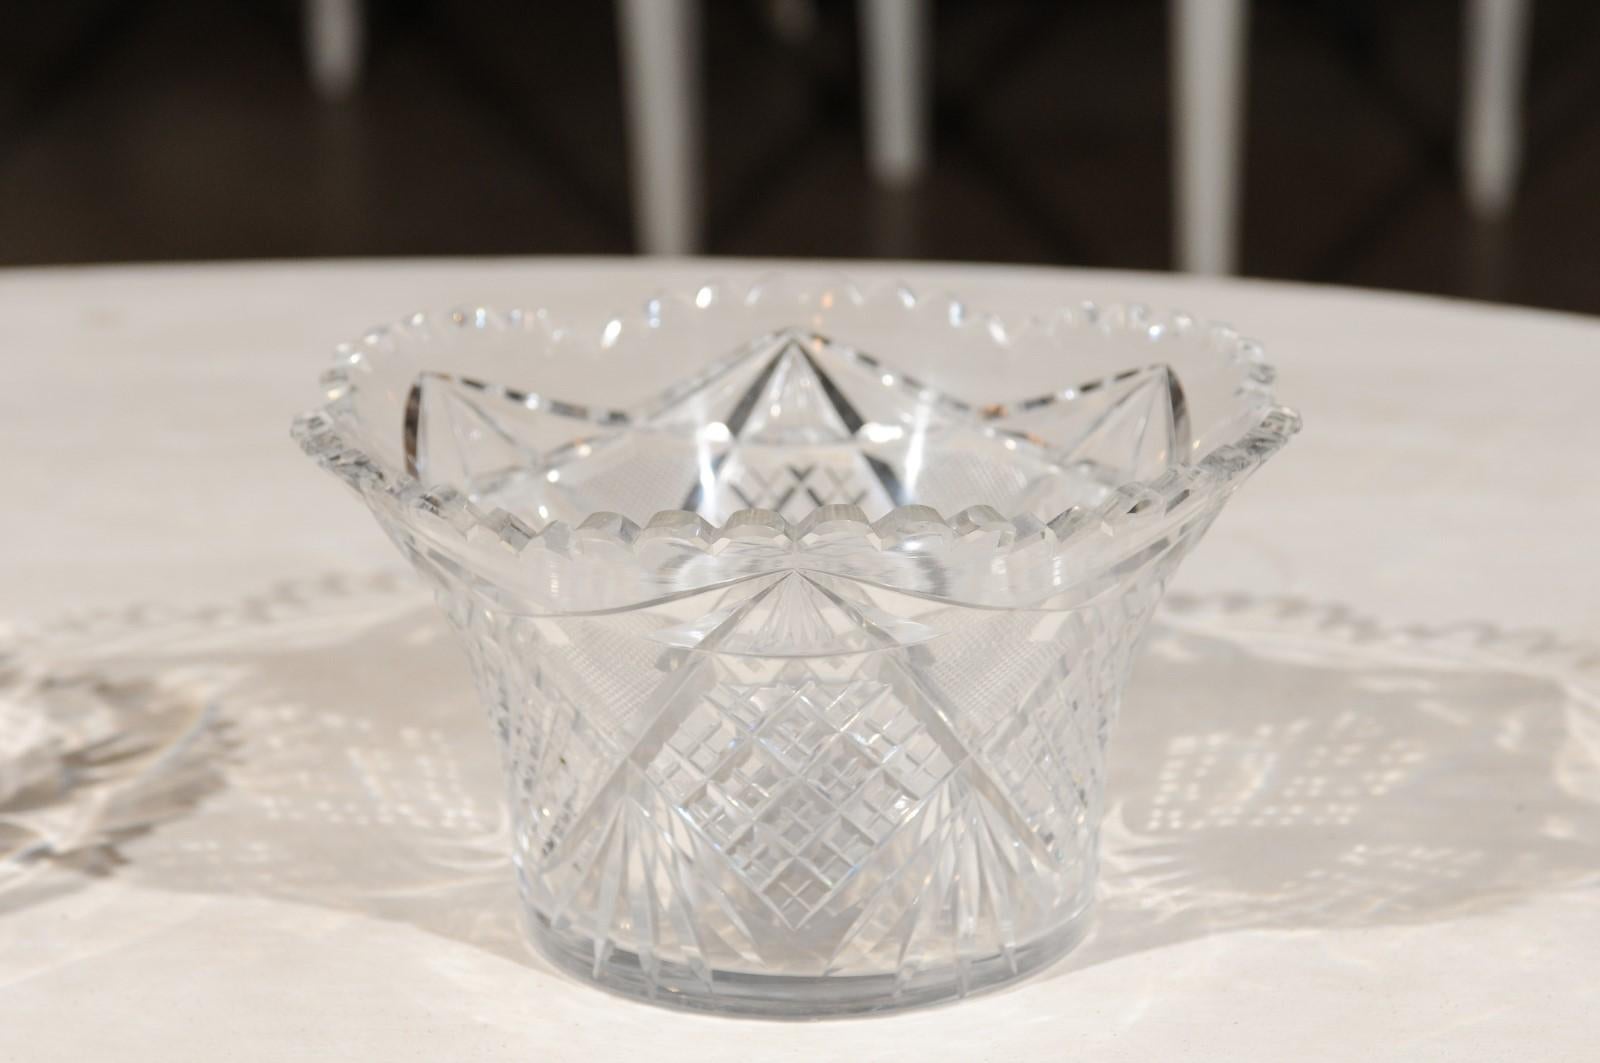 20th Century English Cut Crystal Bowl with Scalloped Top and Diamond Motifs, circa 1900 For Sale